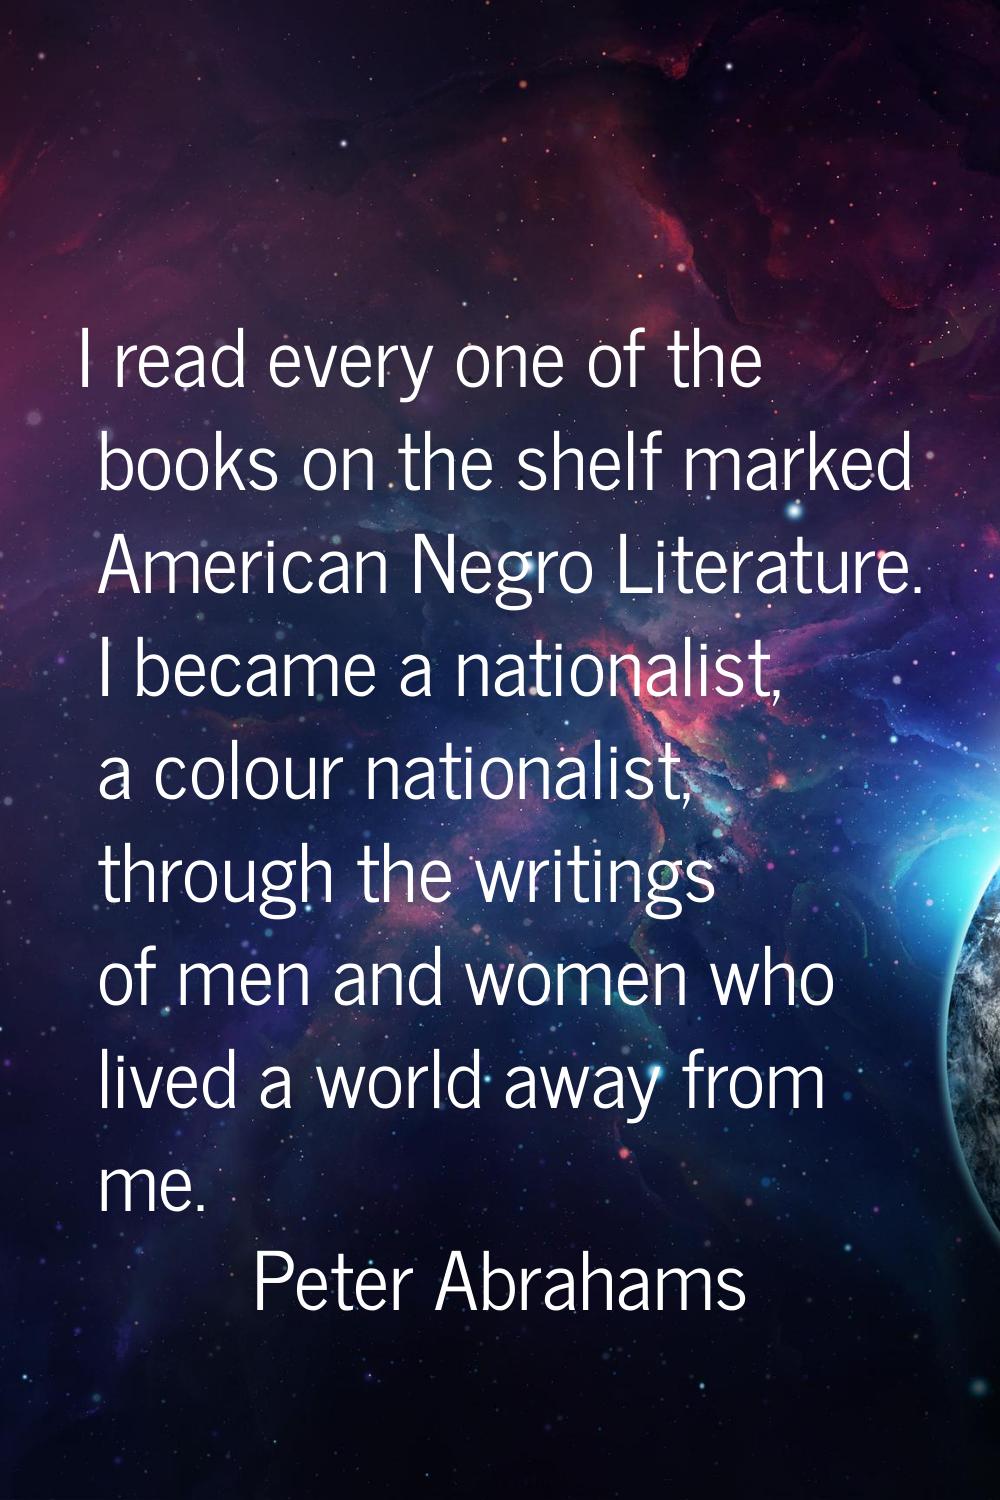 I read every one of the books on the shelf marked American Negro Literature. I became a nationalist